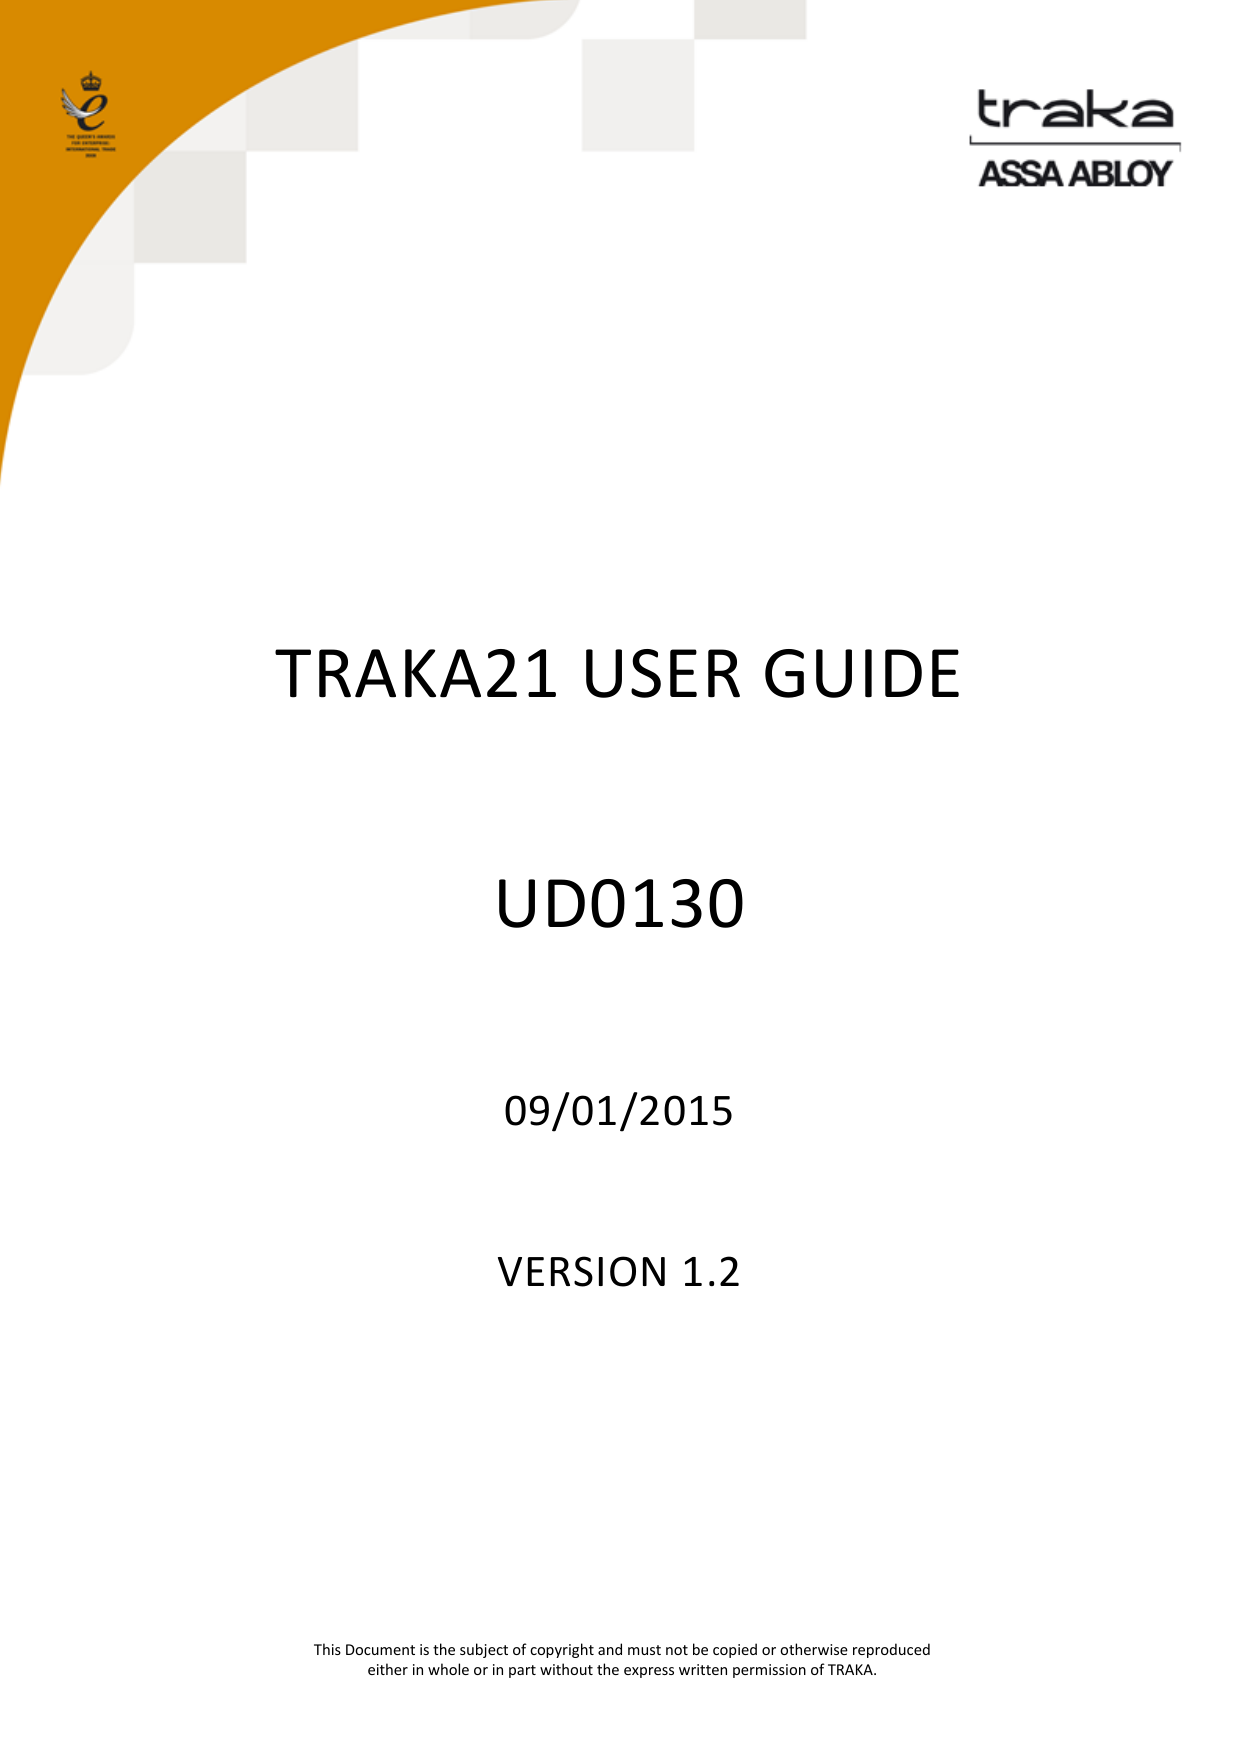   This Document is the subject of copyright and must not be copied or otherwise reproduced either in whole or in part without the express written permission of TRAKA.         TRAKA21 USER GUIDE  UD0130   09/01/2015 VERSION 1.2    